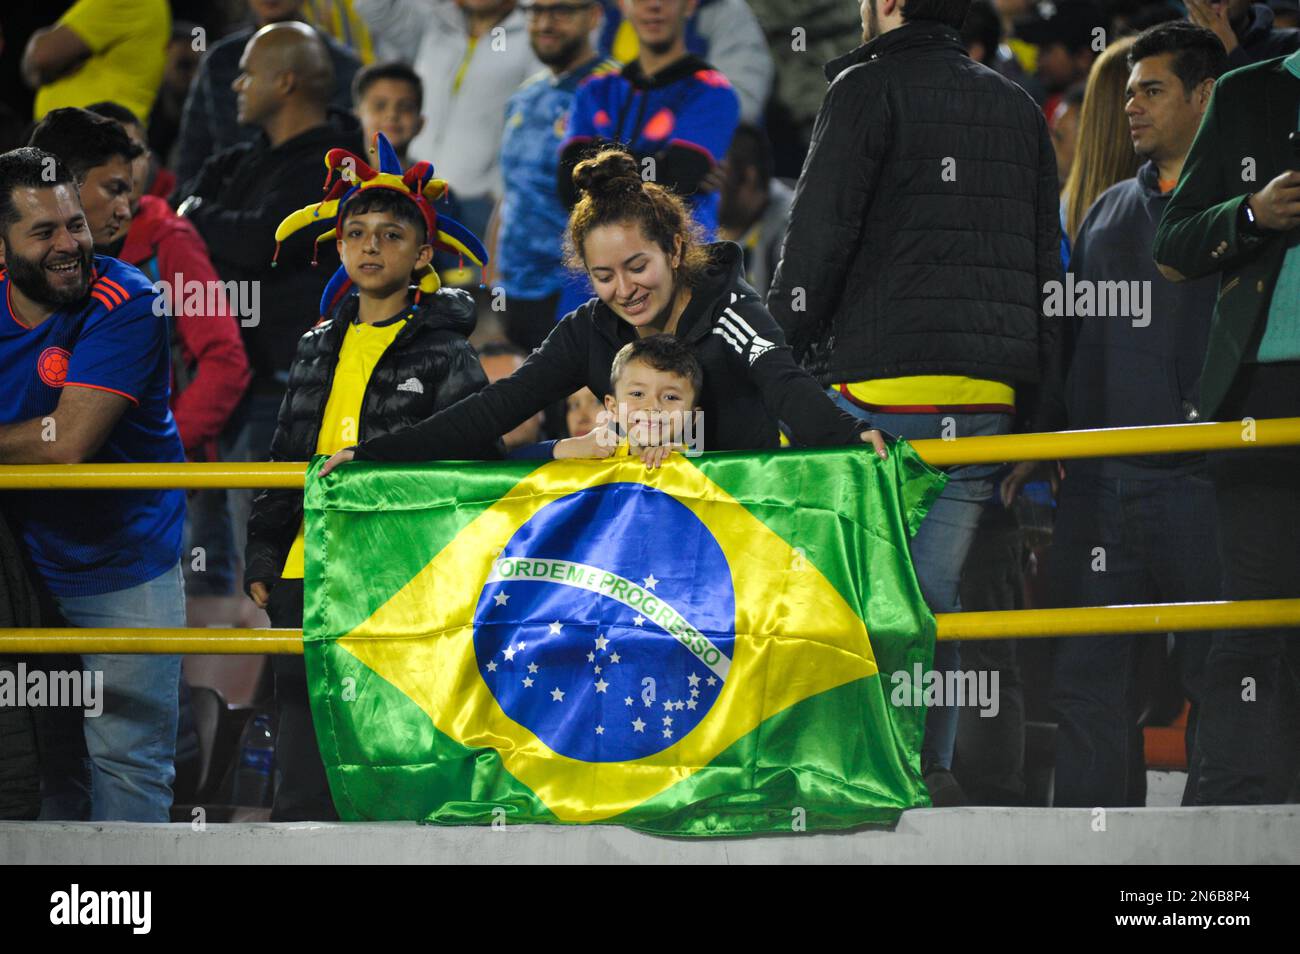 Bogota, Colombia on February 8, 2023. Fans of Brazil pose for a photo with a Brazil flag during the CONMEBOL South American U-20 Colombia tournament match between Colombia and Brazil, in Bogota, Colombia on February 8, 2023. Photo by: Chepa Beltran/Long Visual Press Stock Photo